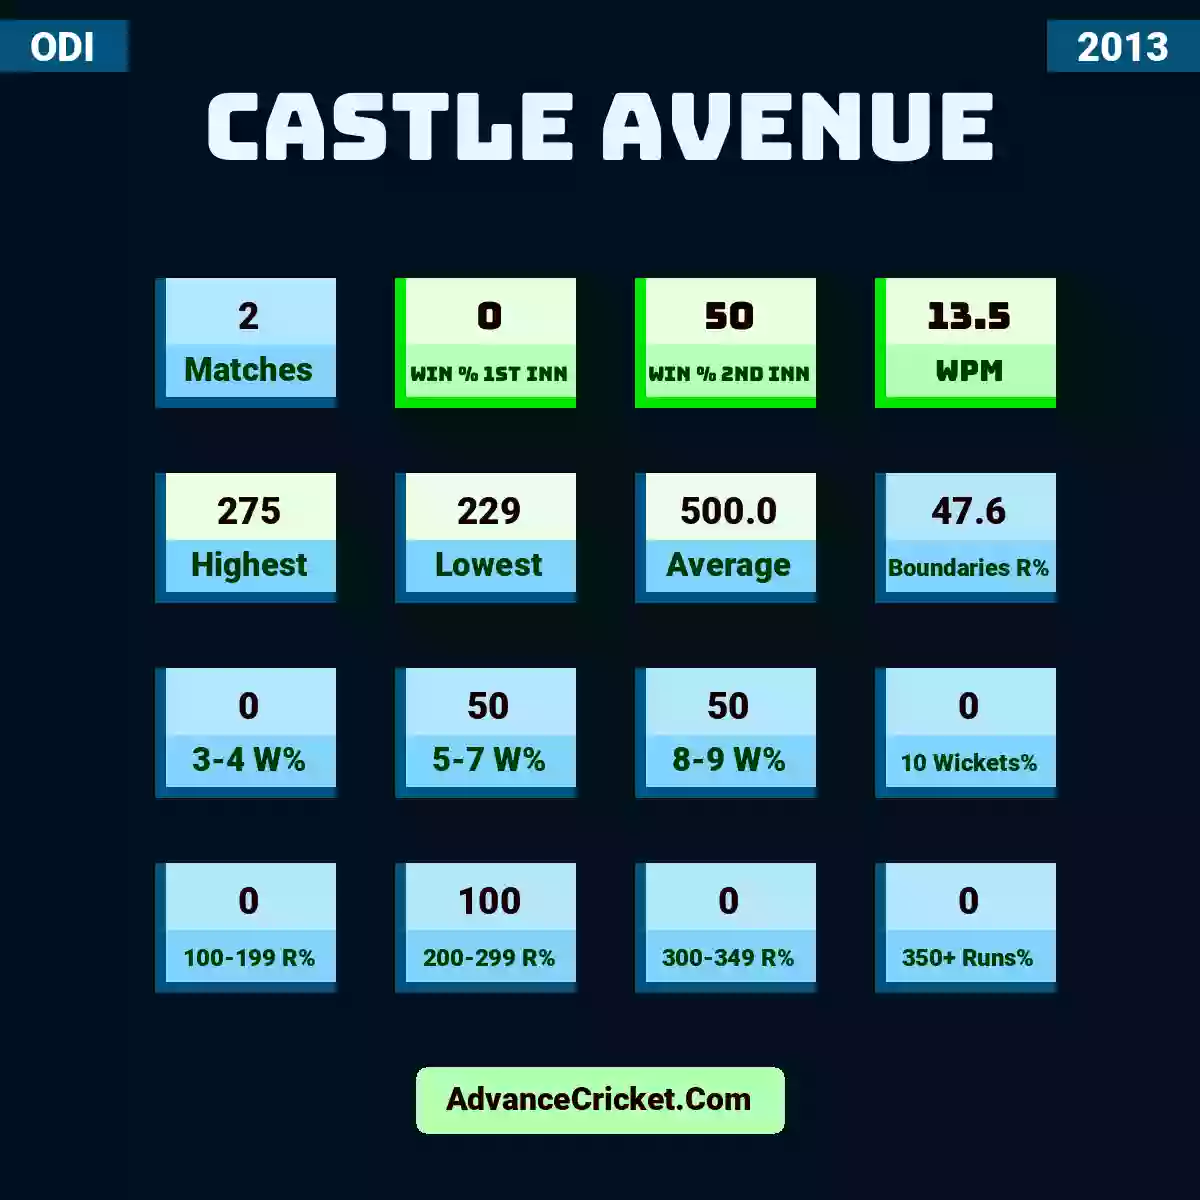 Image showing Castle Avenue with Matches: 2, Win % 1st Inn: 0, Win % 2nd Inn: 50, WPM: 13.5, Highest: 275, Lowest: 229, Average: 500.0, Boundaries R%: 47.6, 3-4 W%: 0, 5-7 W%: 50, 8-9 W%: 50, 10 Wickets%: 0, 100-199 R%: 0, 200-299 R%: 100, 300-349 R%: 0, 350+ Runs%: 0.